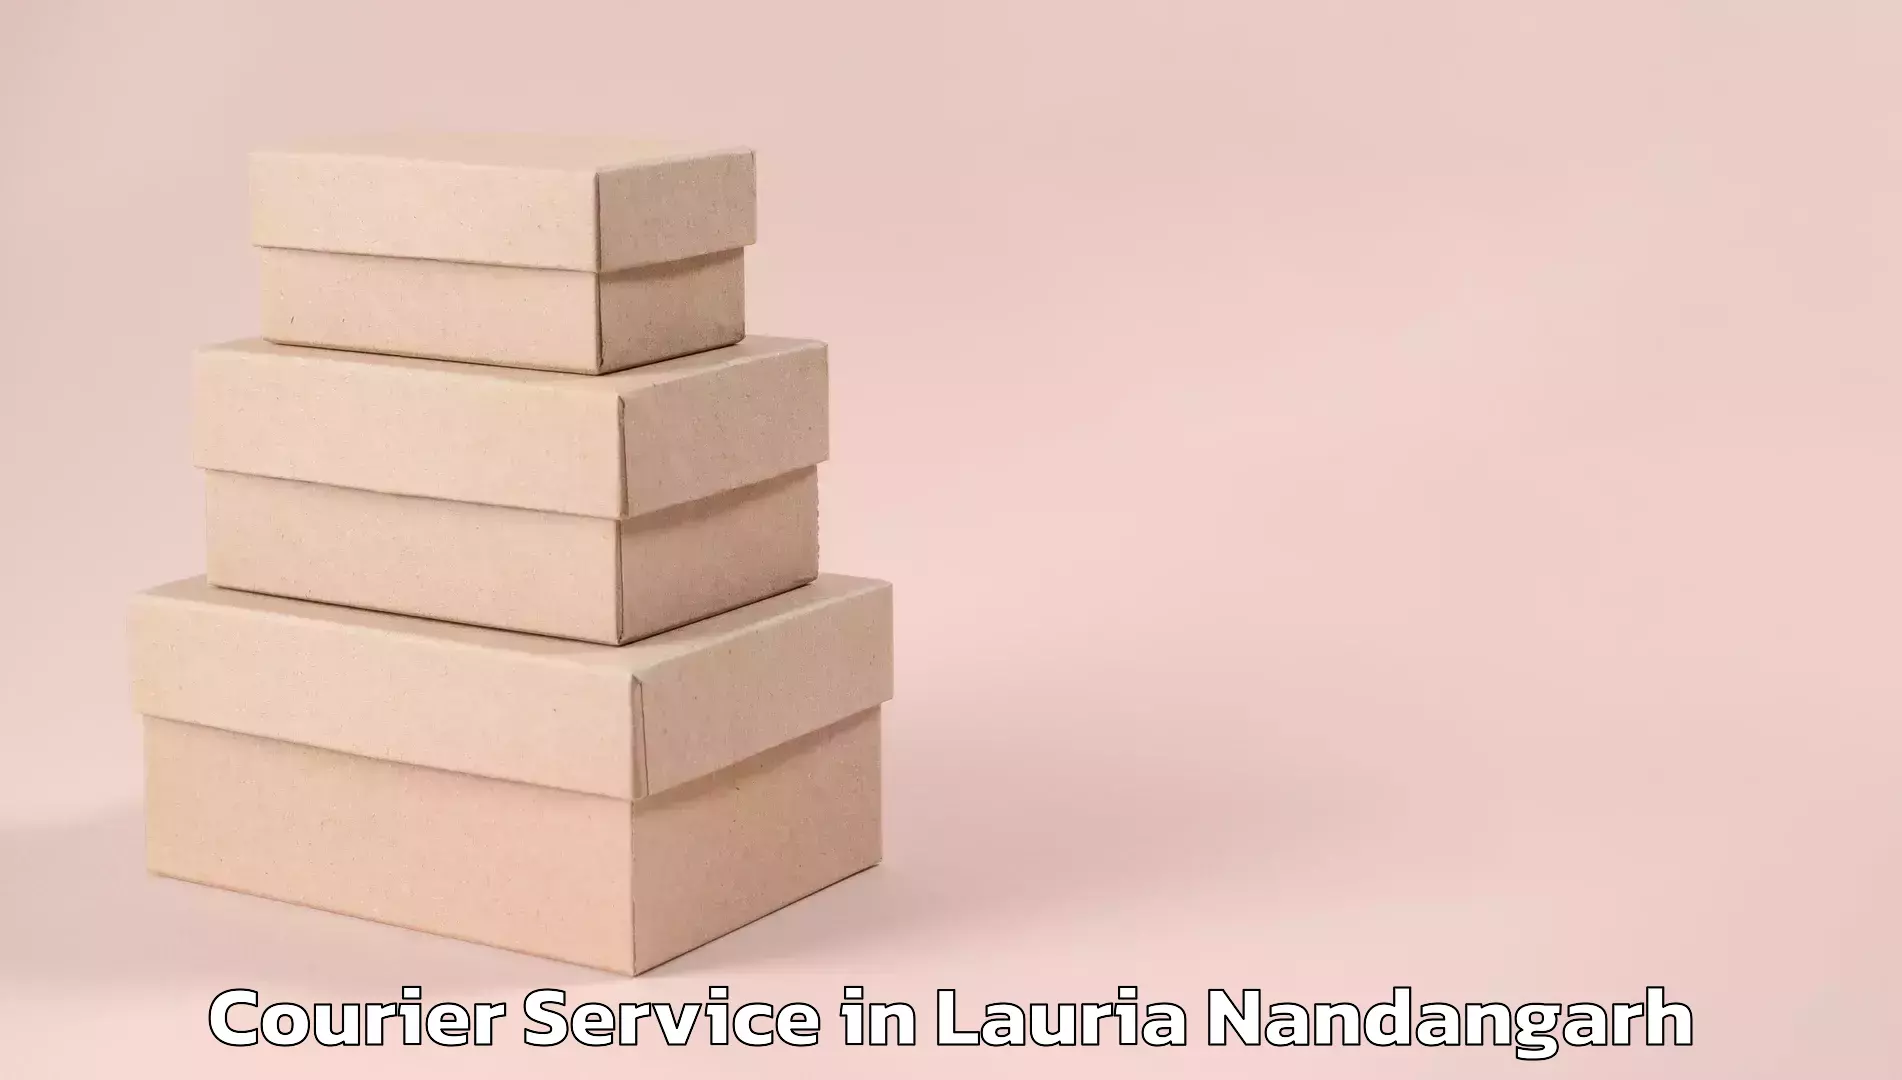 Nationwide courier service in Lauria Nandangarh